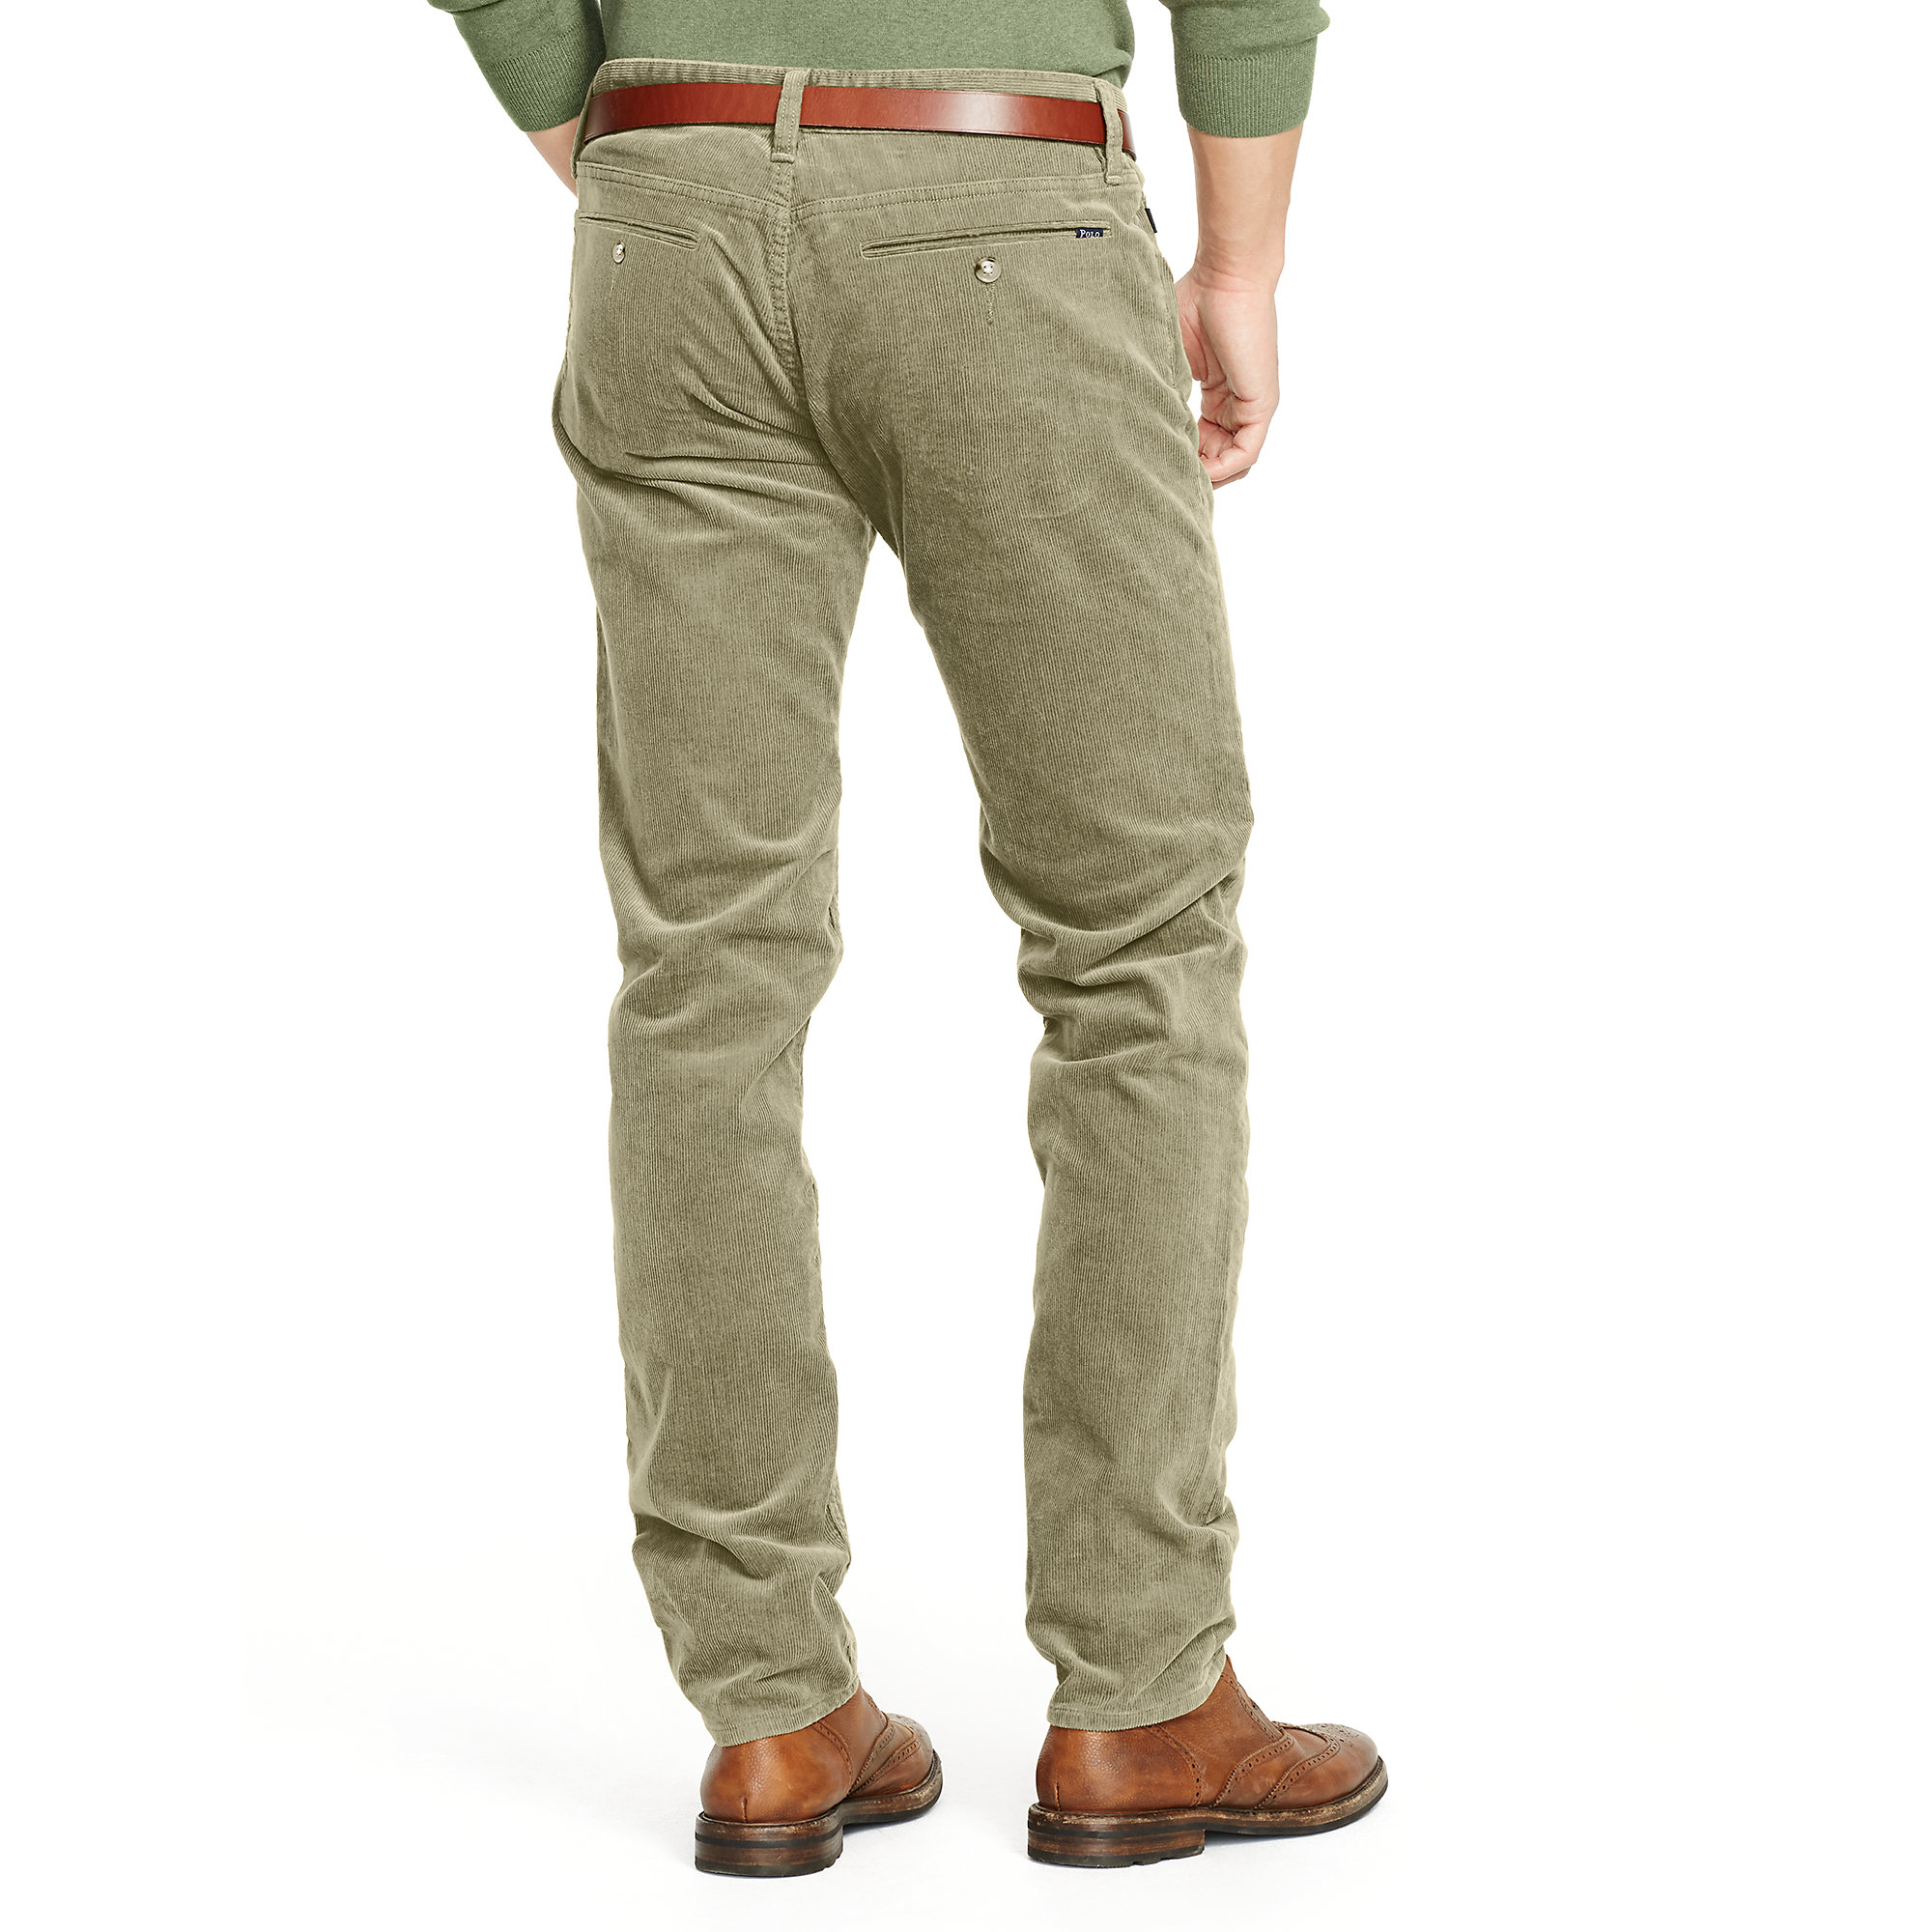 Lyst - Polo Ralph Lauren Stretch Slim-fit Corduroy Pant in Green for Men